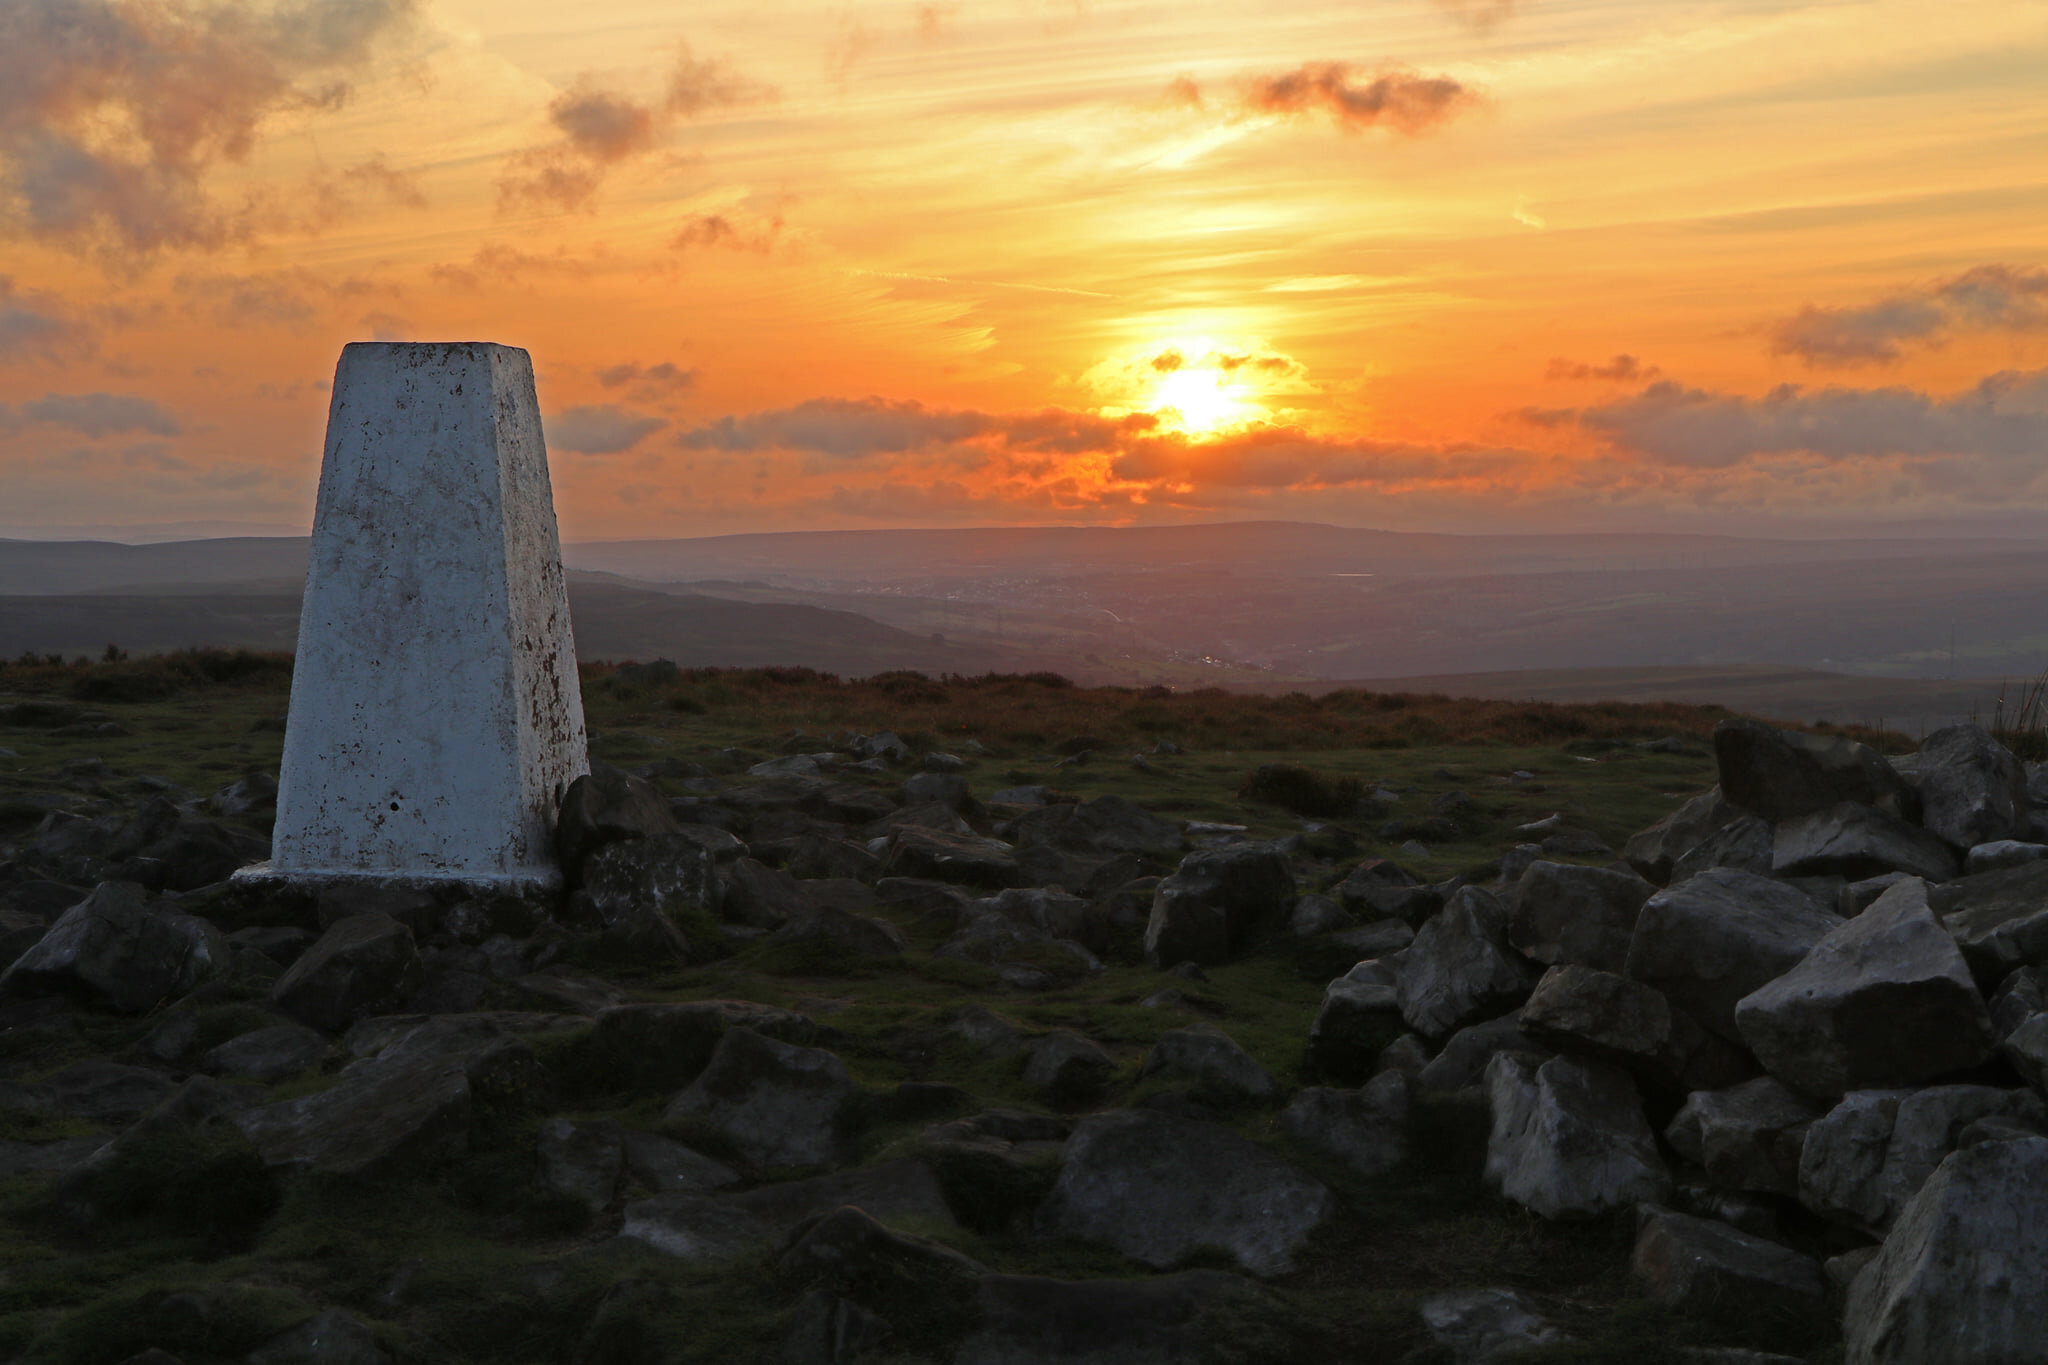 Sunset at the Blorenge trig point